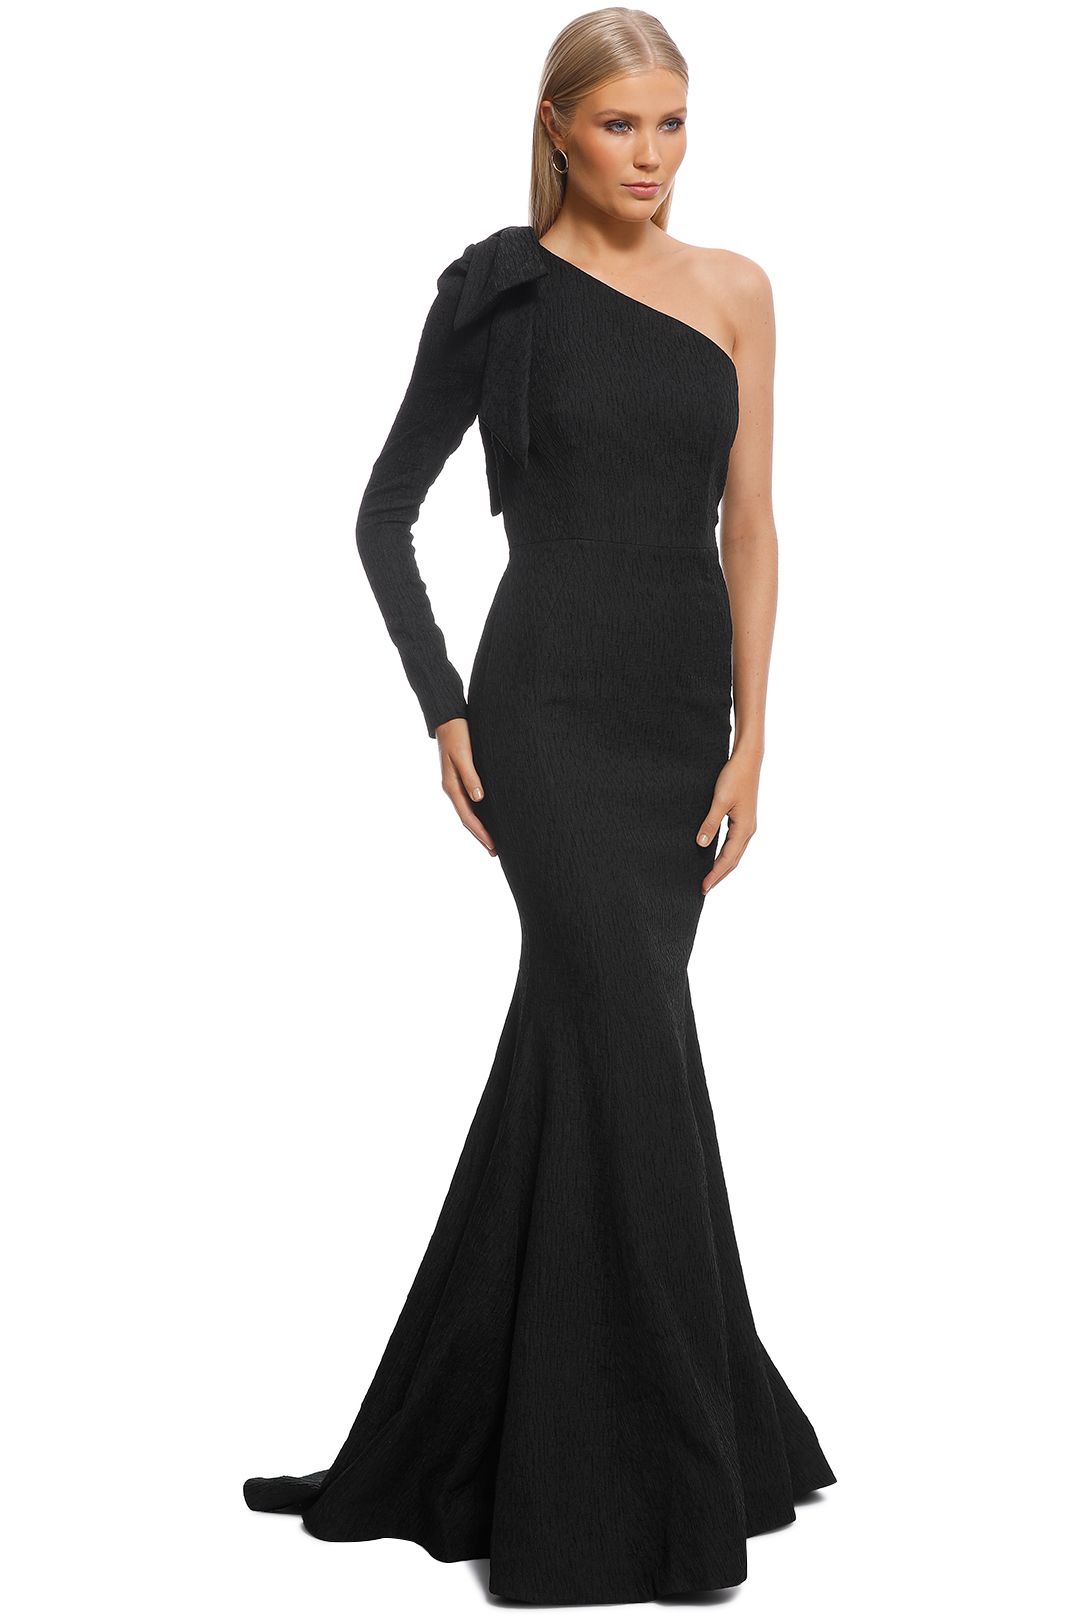 Harlow Bow Gown in Black by Rebecca Vallance for Hire | GlamCorner